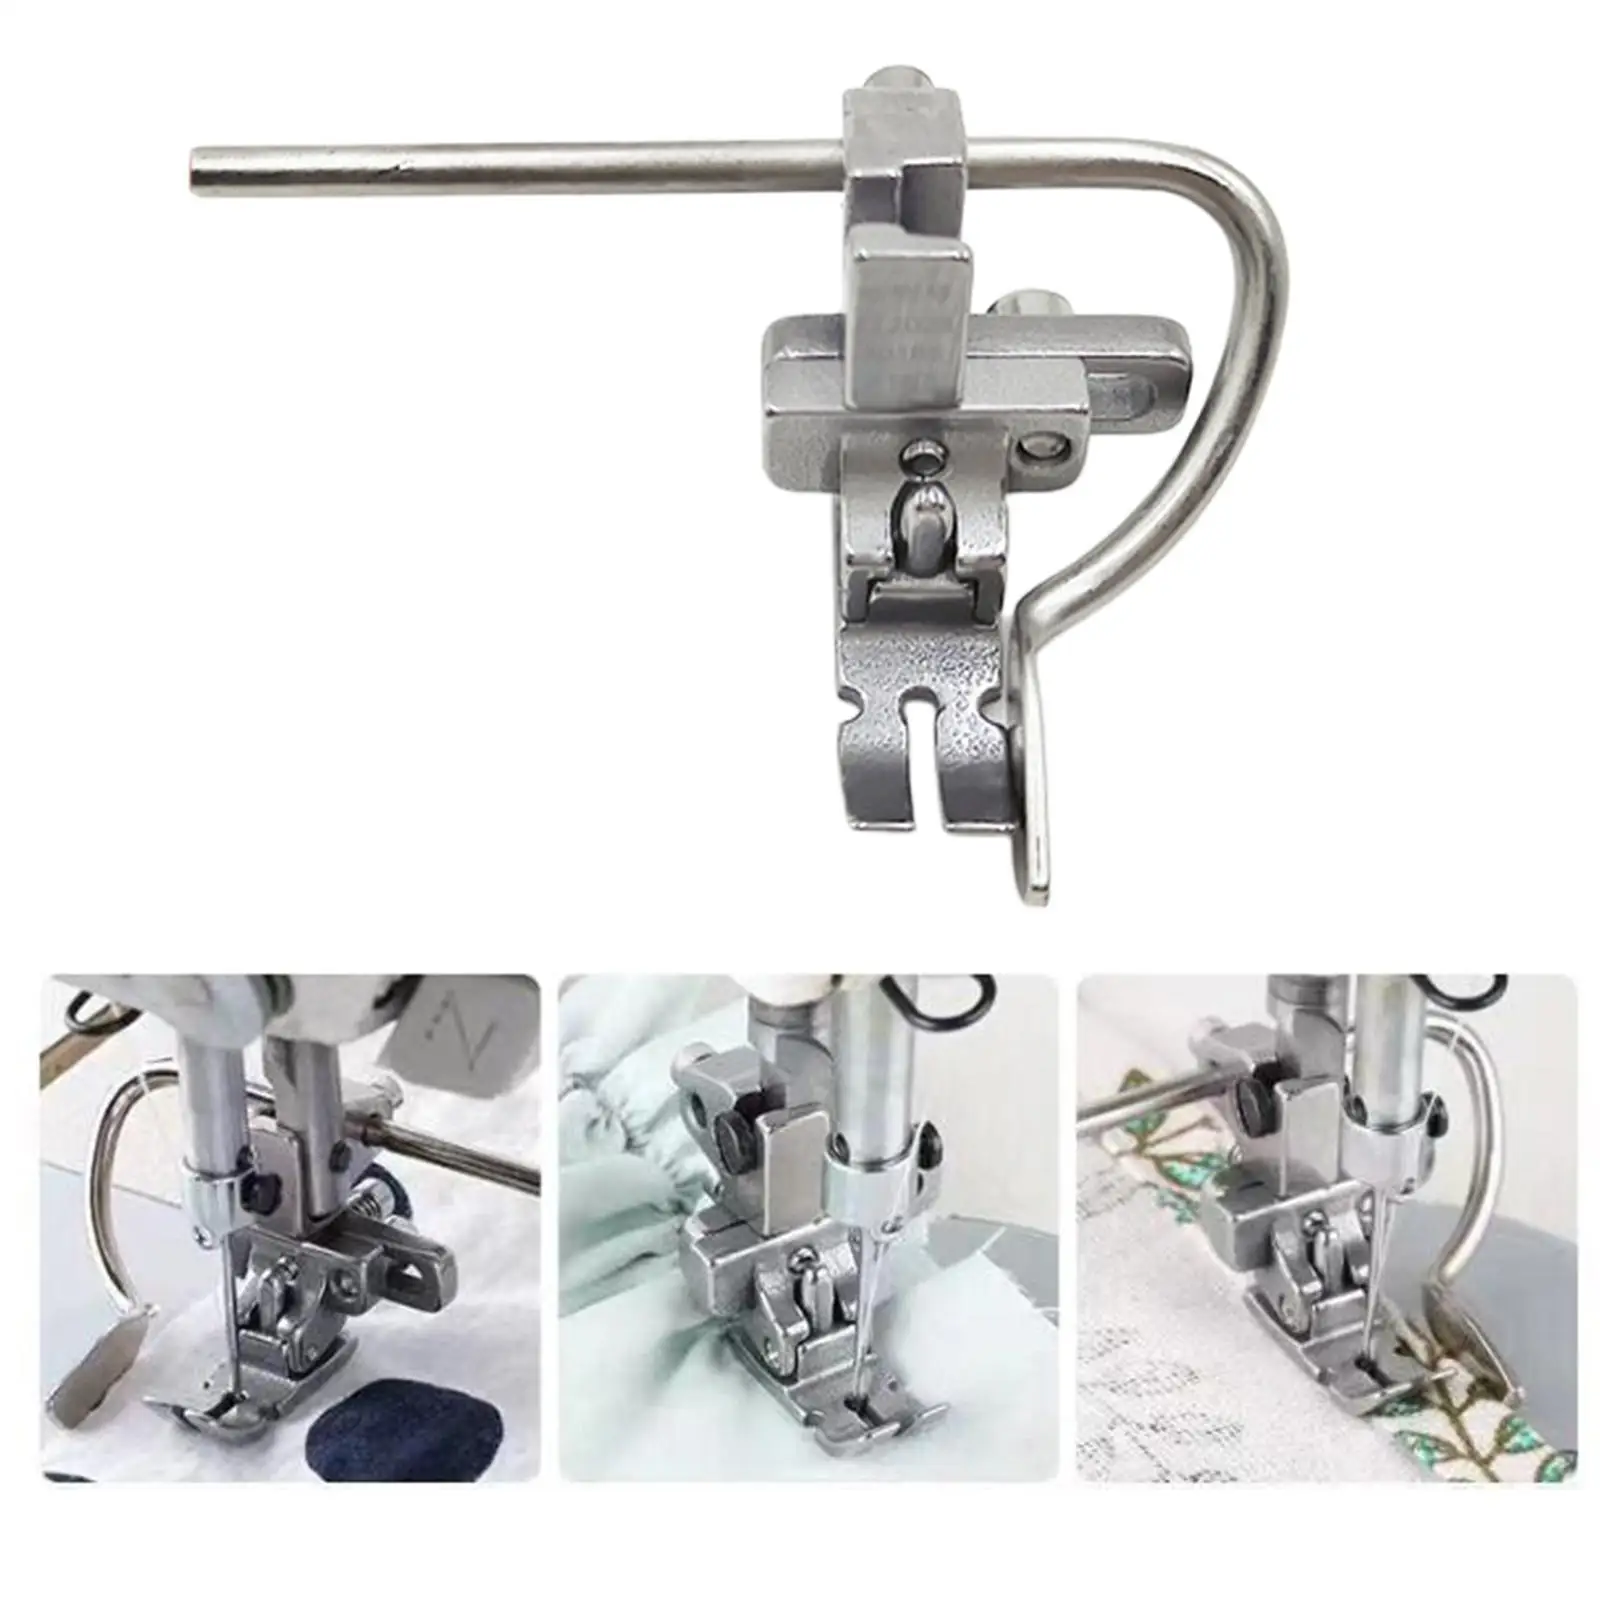 Presser Foot for Sewing Machine Replacement Parts for Bag Sewing Pillow Cover Stitching DIY Arts Crafts Embroidery Machine